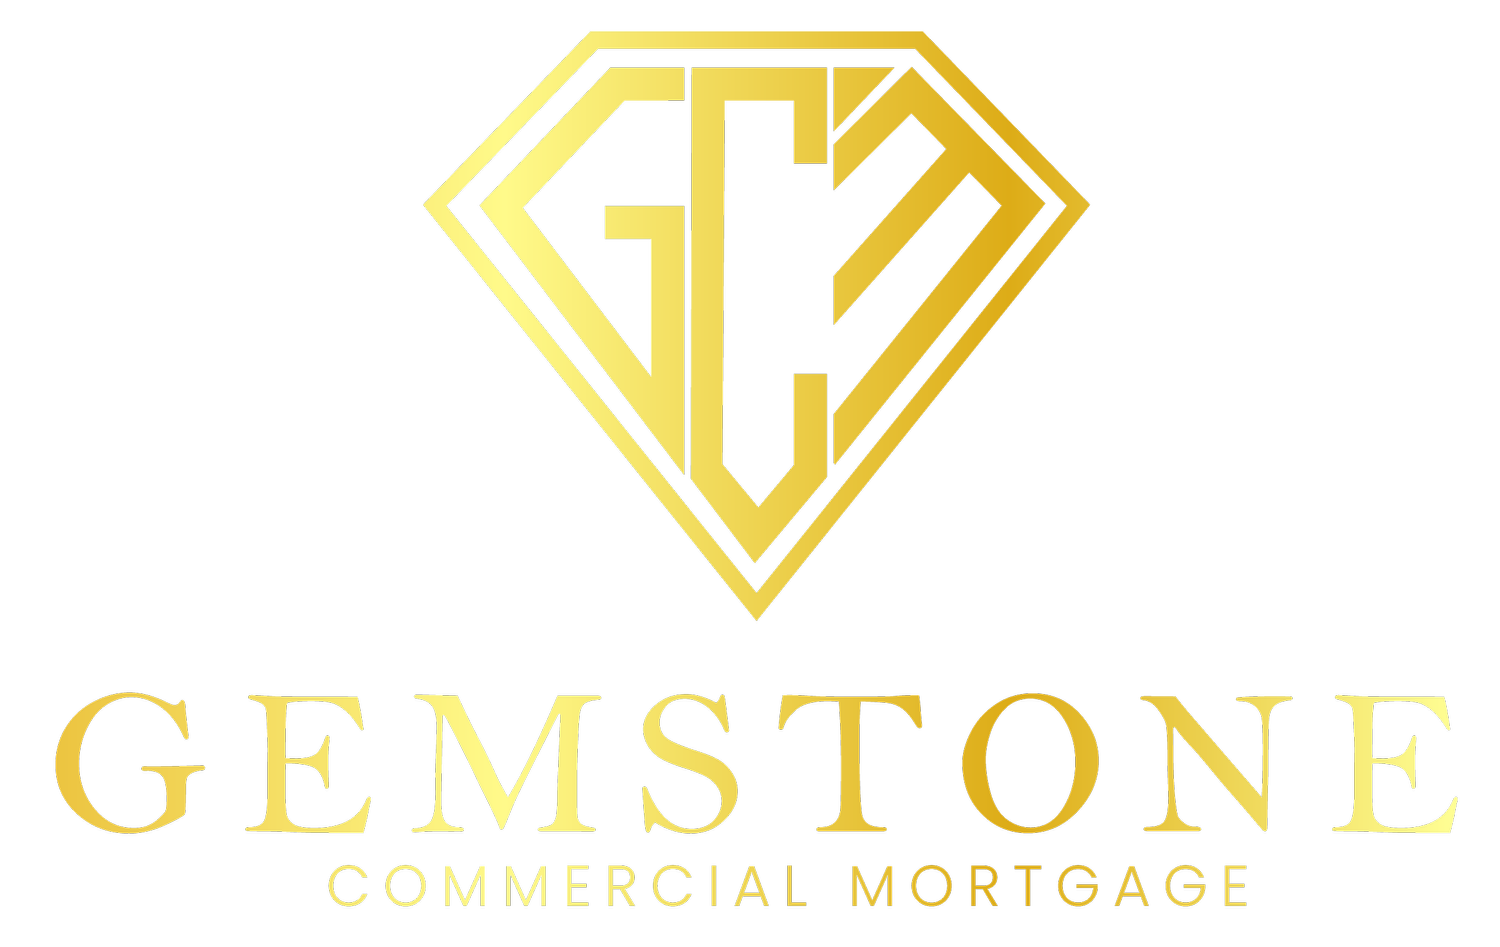 Gemstone Commercial Mortgage